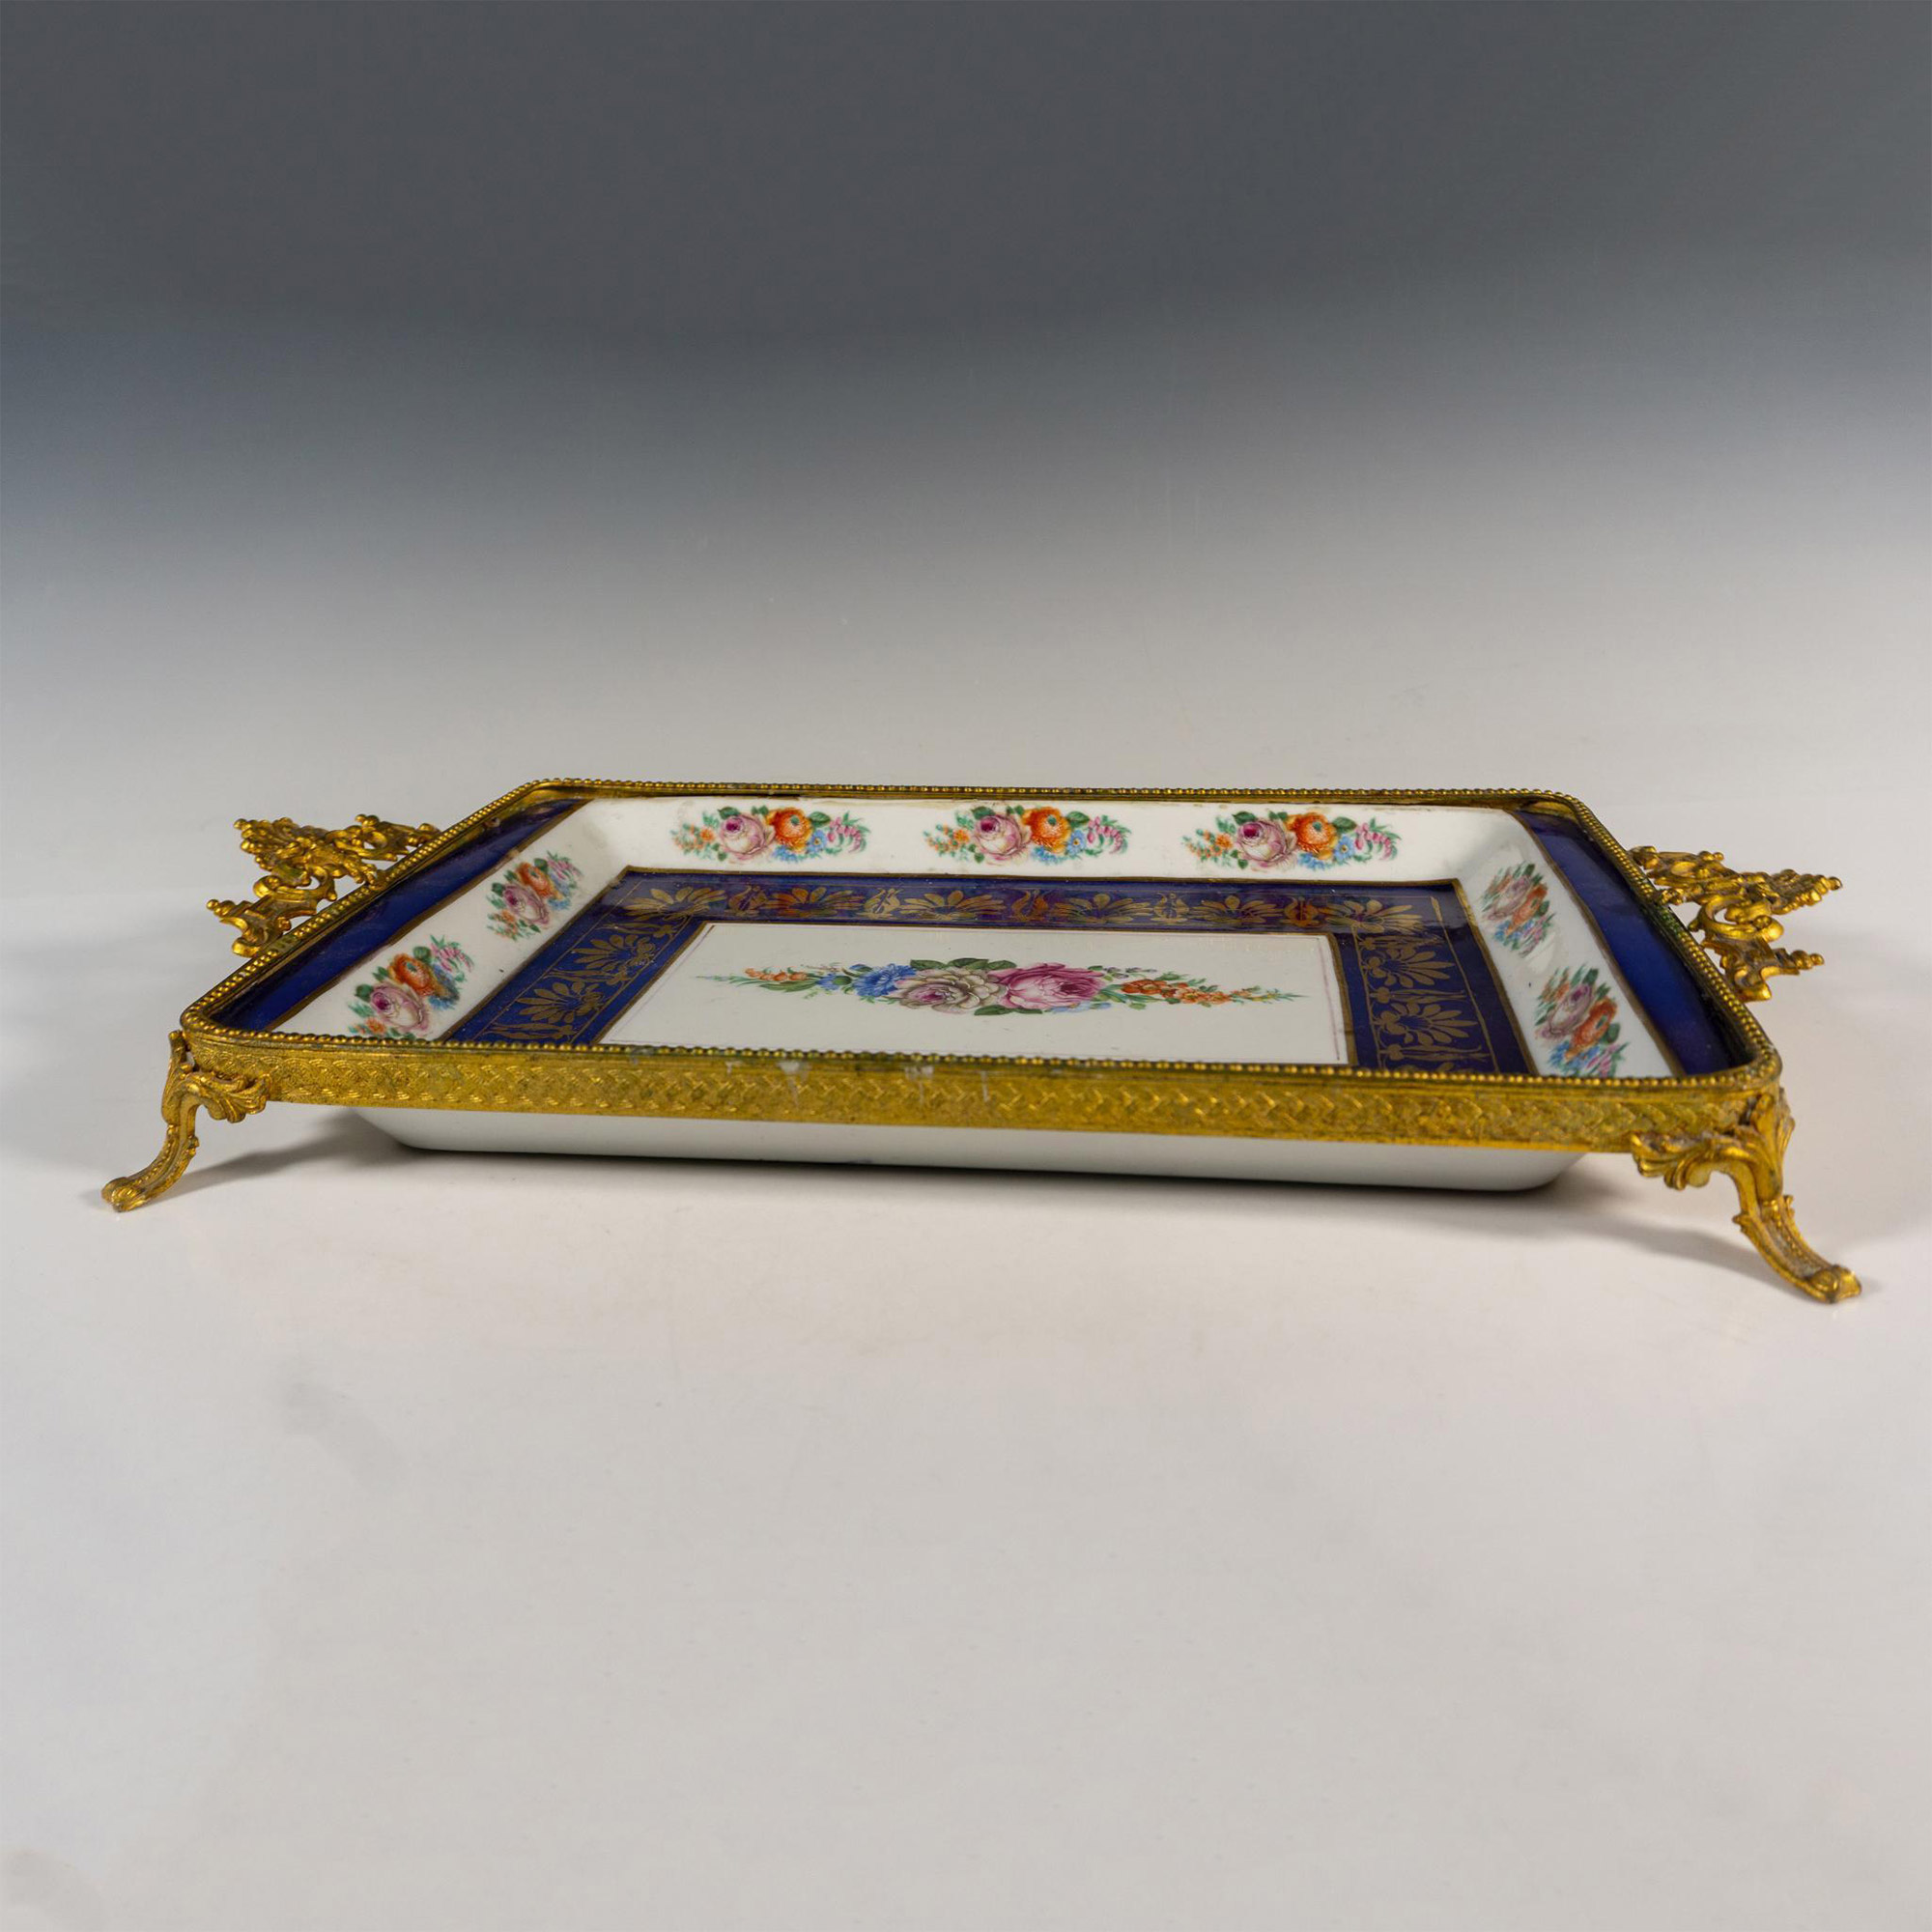 Decor Ancien Limoges Tray, French Bronze Fittings 3355 - Image 4 of 4